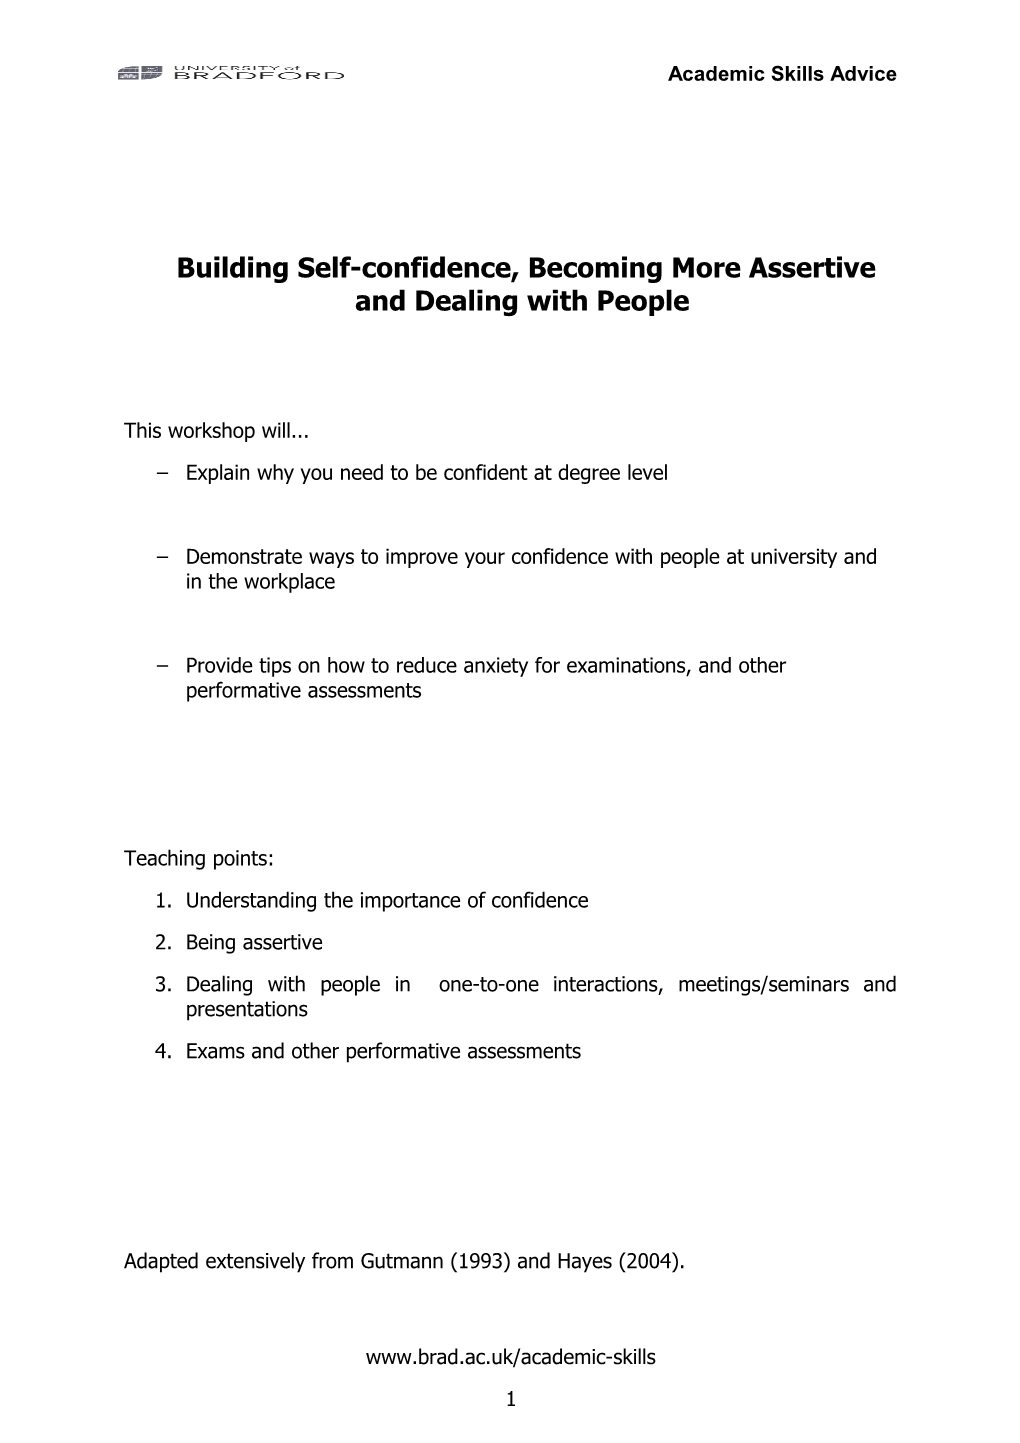 Building Self-Confidence, Becoming More Assertive and Dealing with People